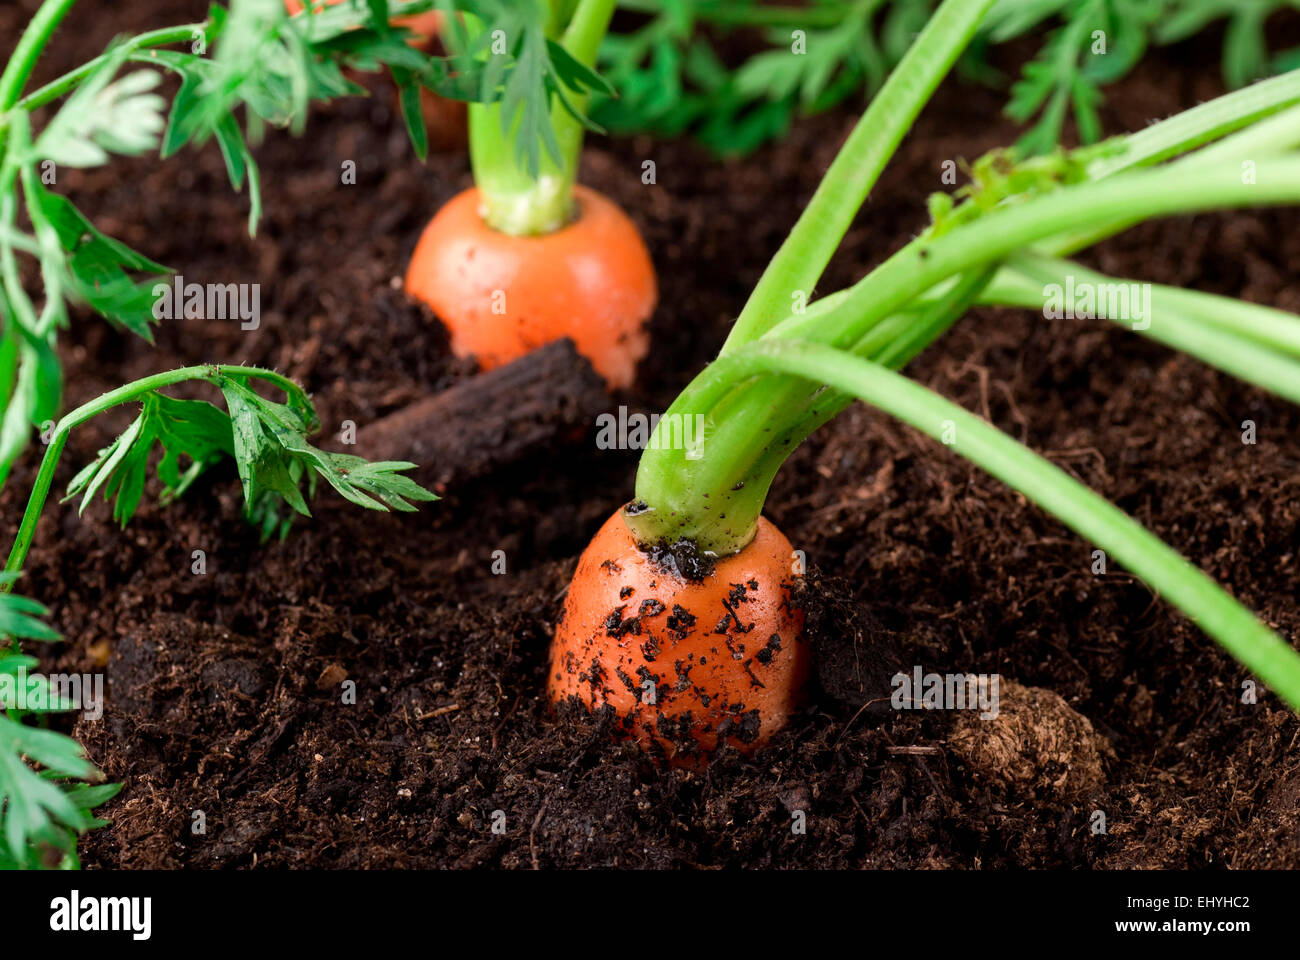 Growing carrots in moisture soil close up. Stock Photo